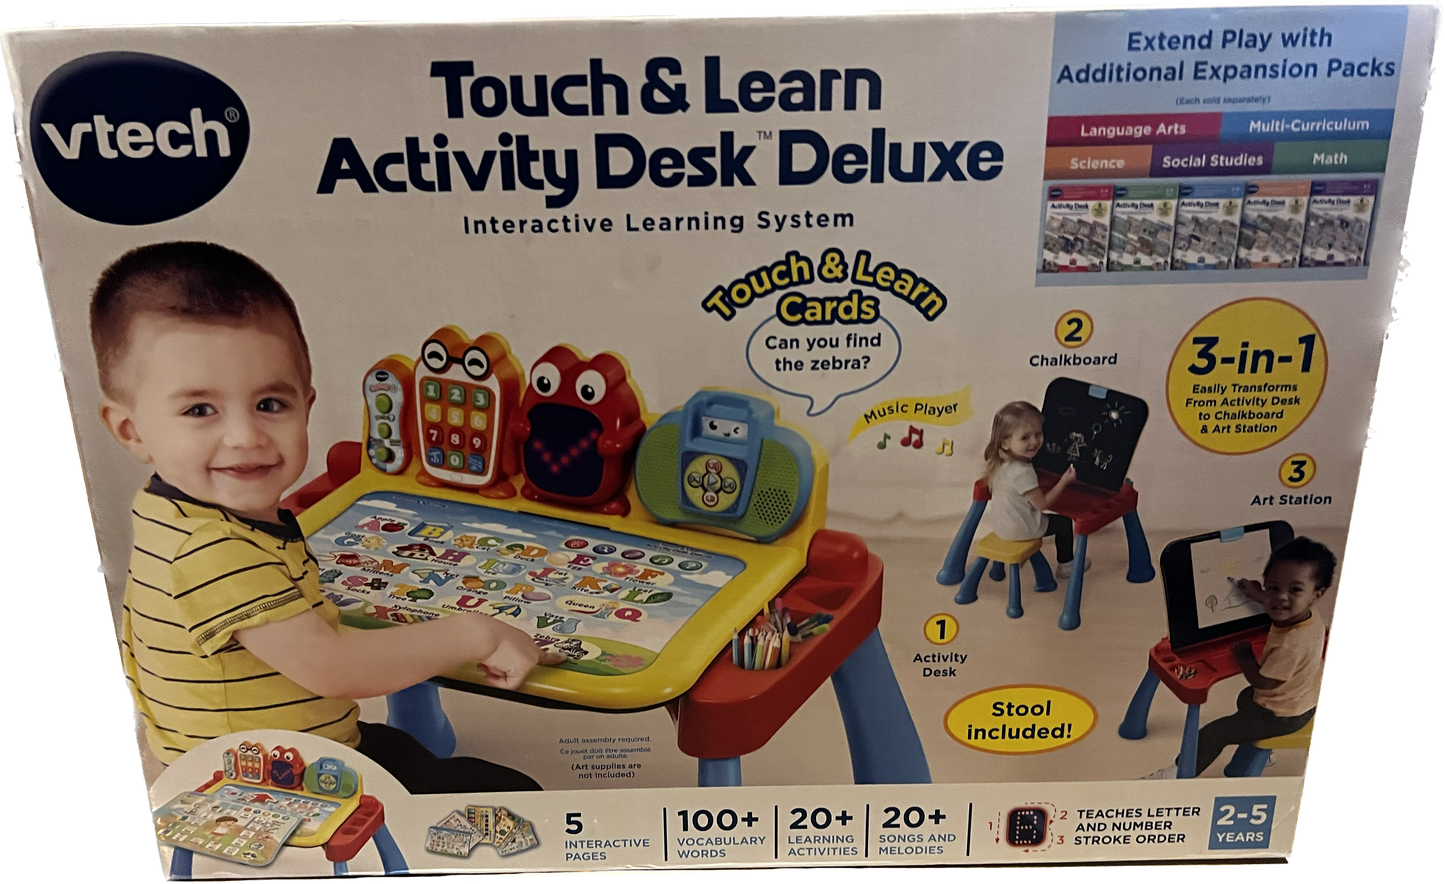 New Vtech Touch & Learn Activity Desk Deluxe